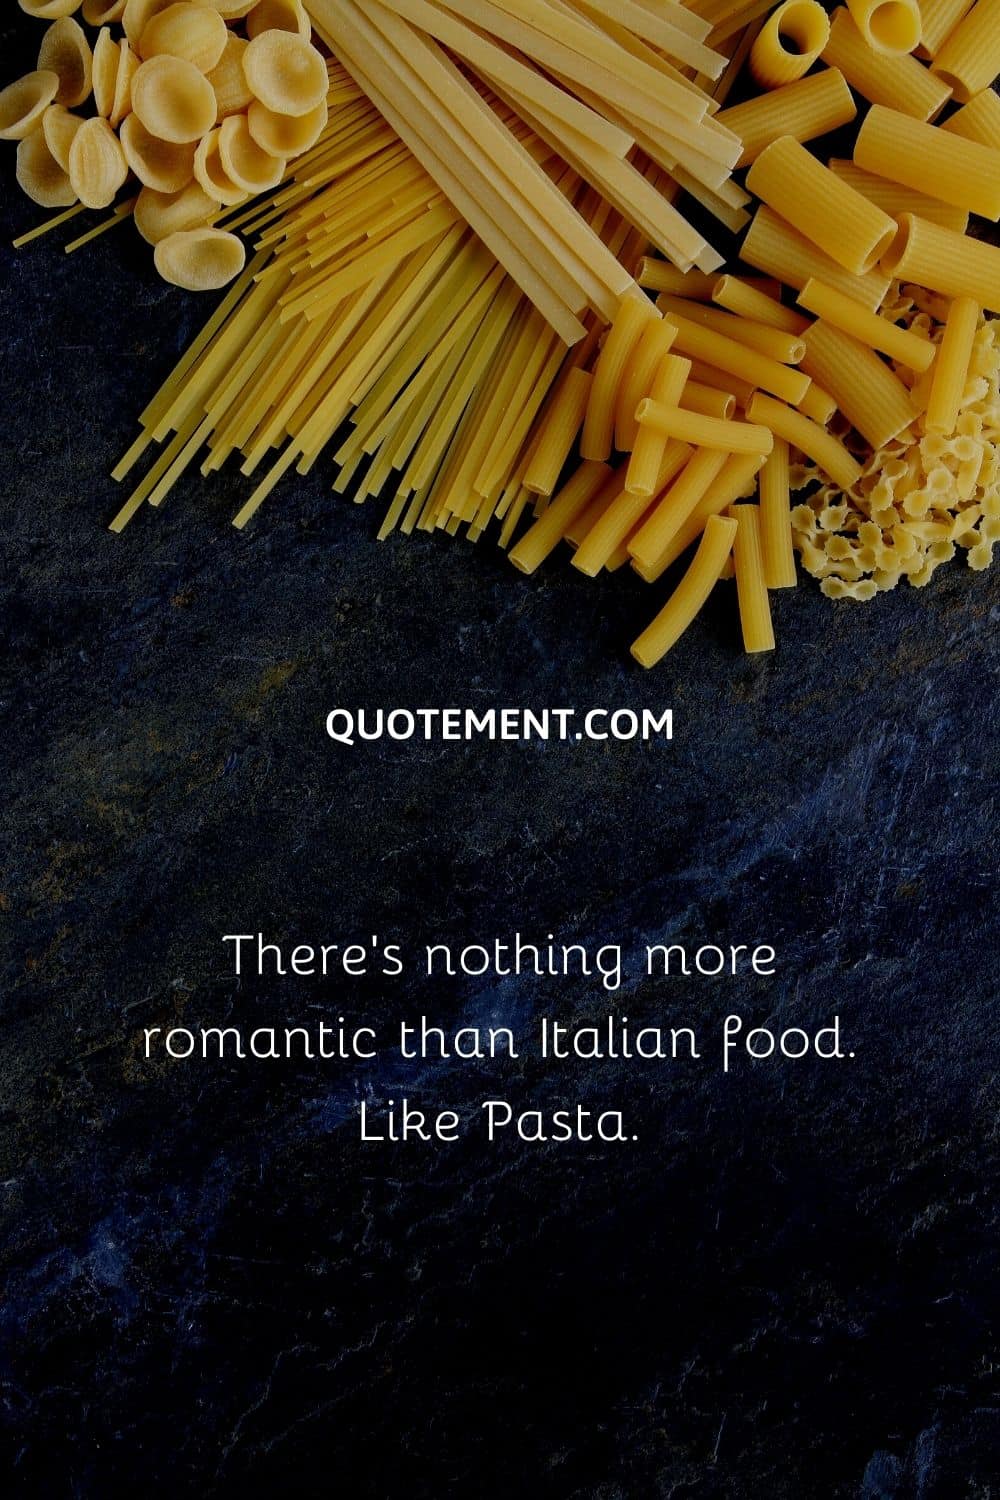 There’s nothing more romantic than Italian food. Like Pasta